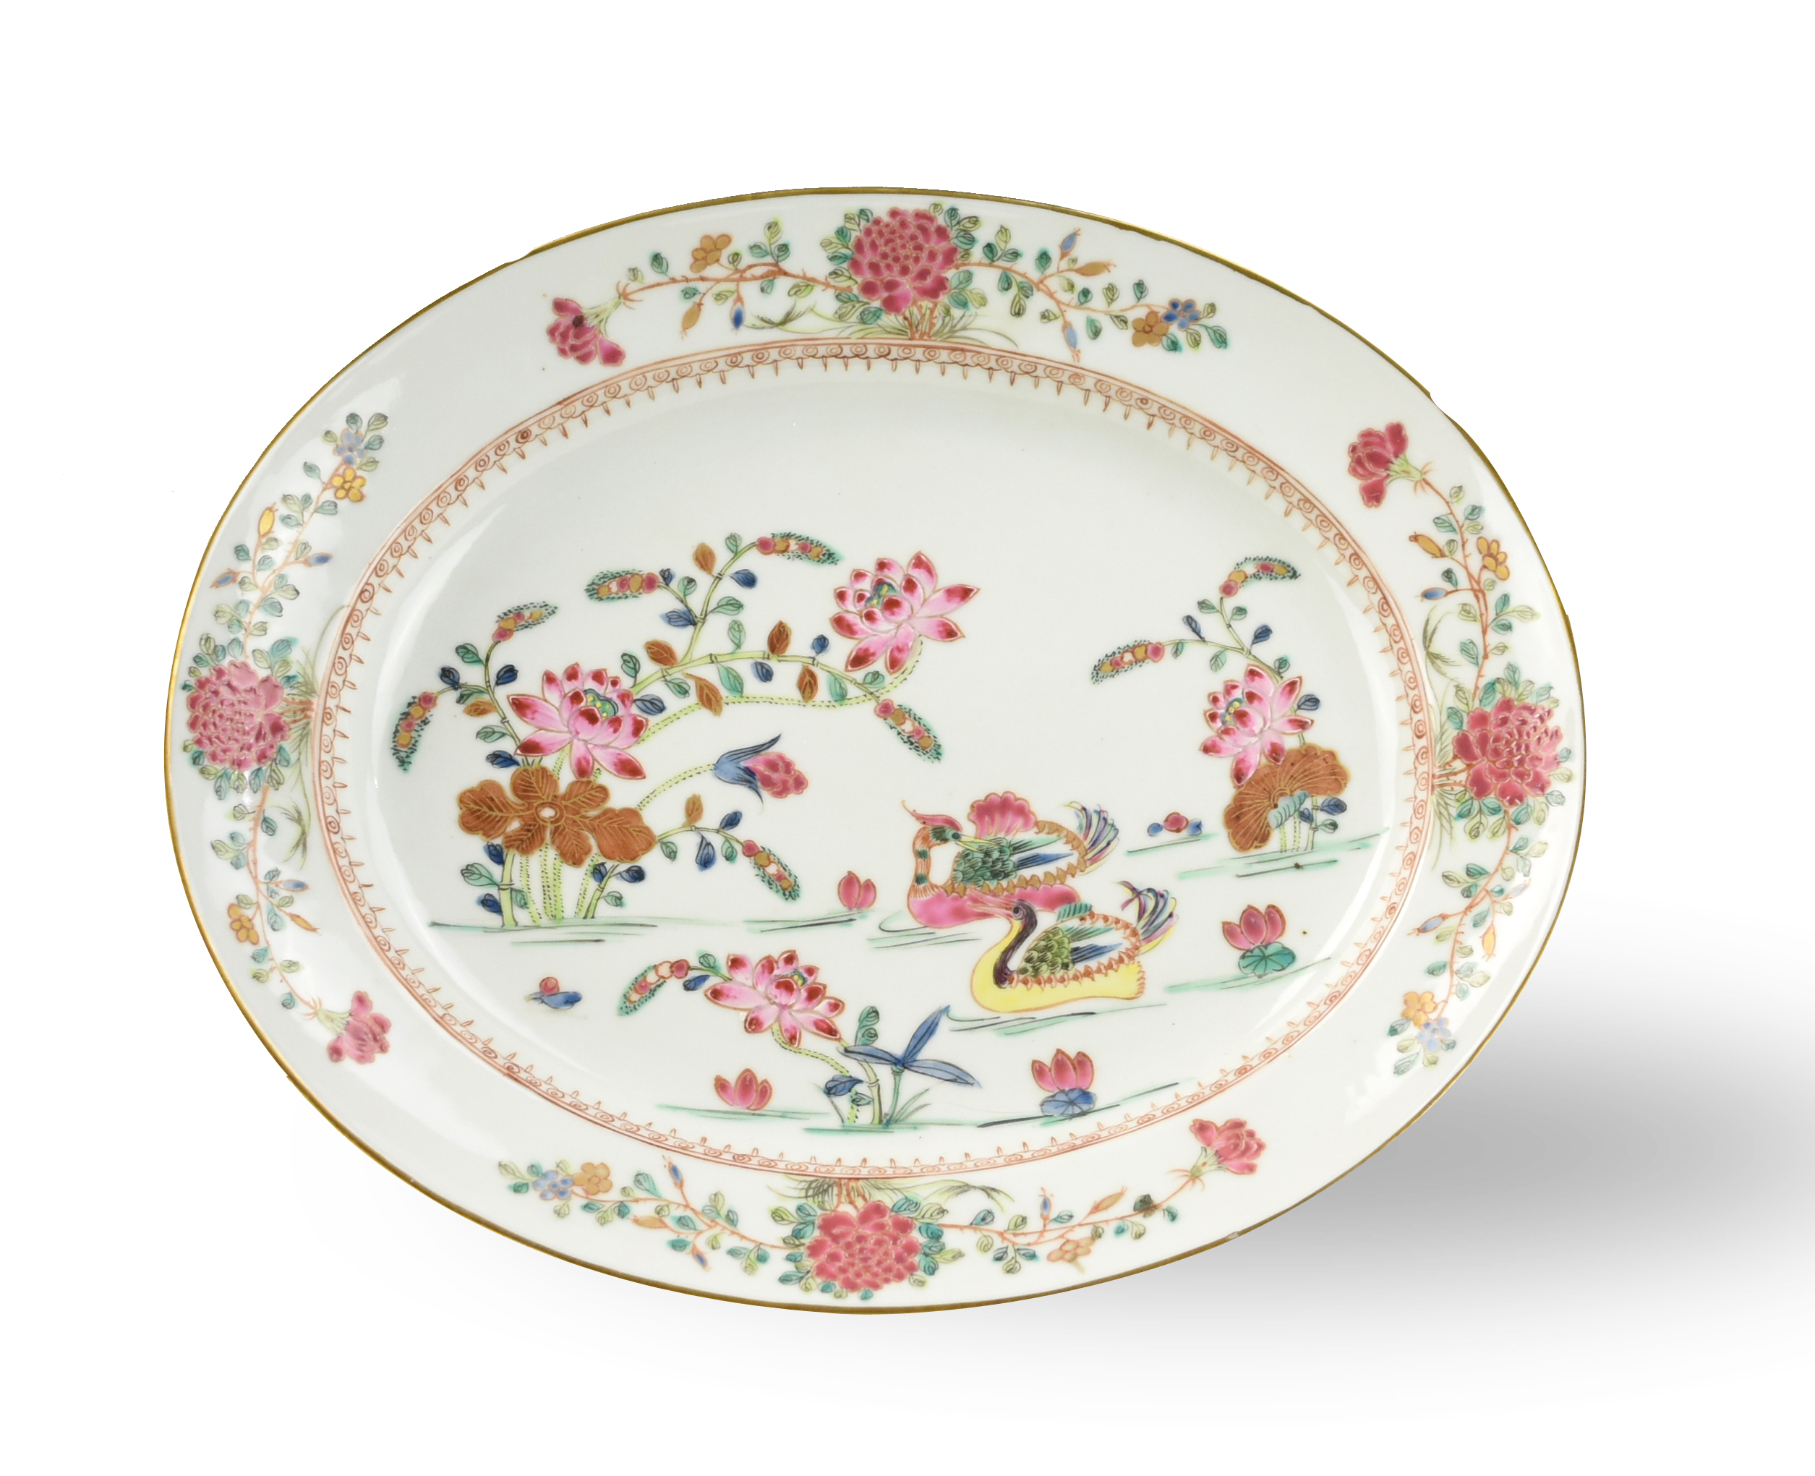 CHINESE EXPORT FAMILLE ROSE PLATE 2cebde